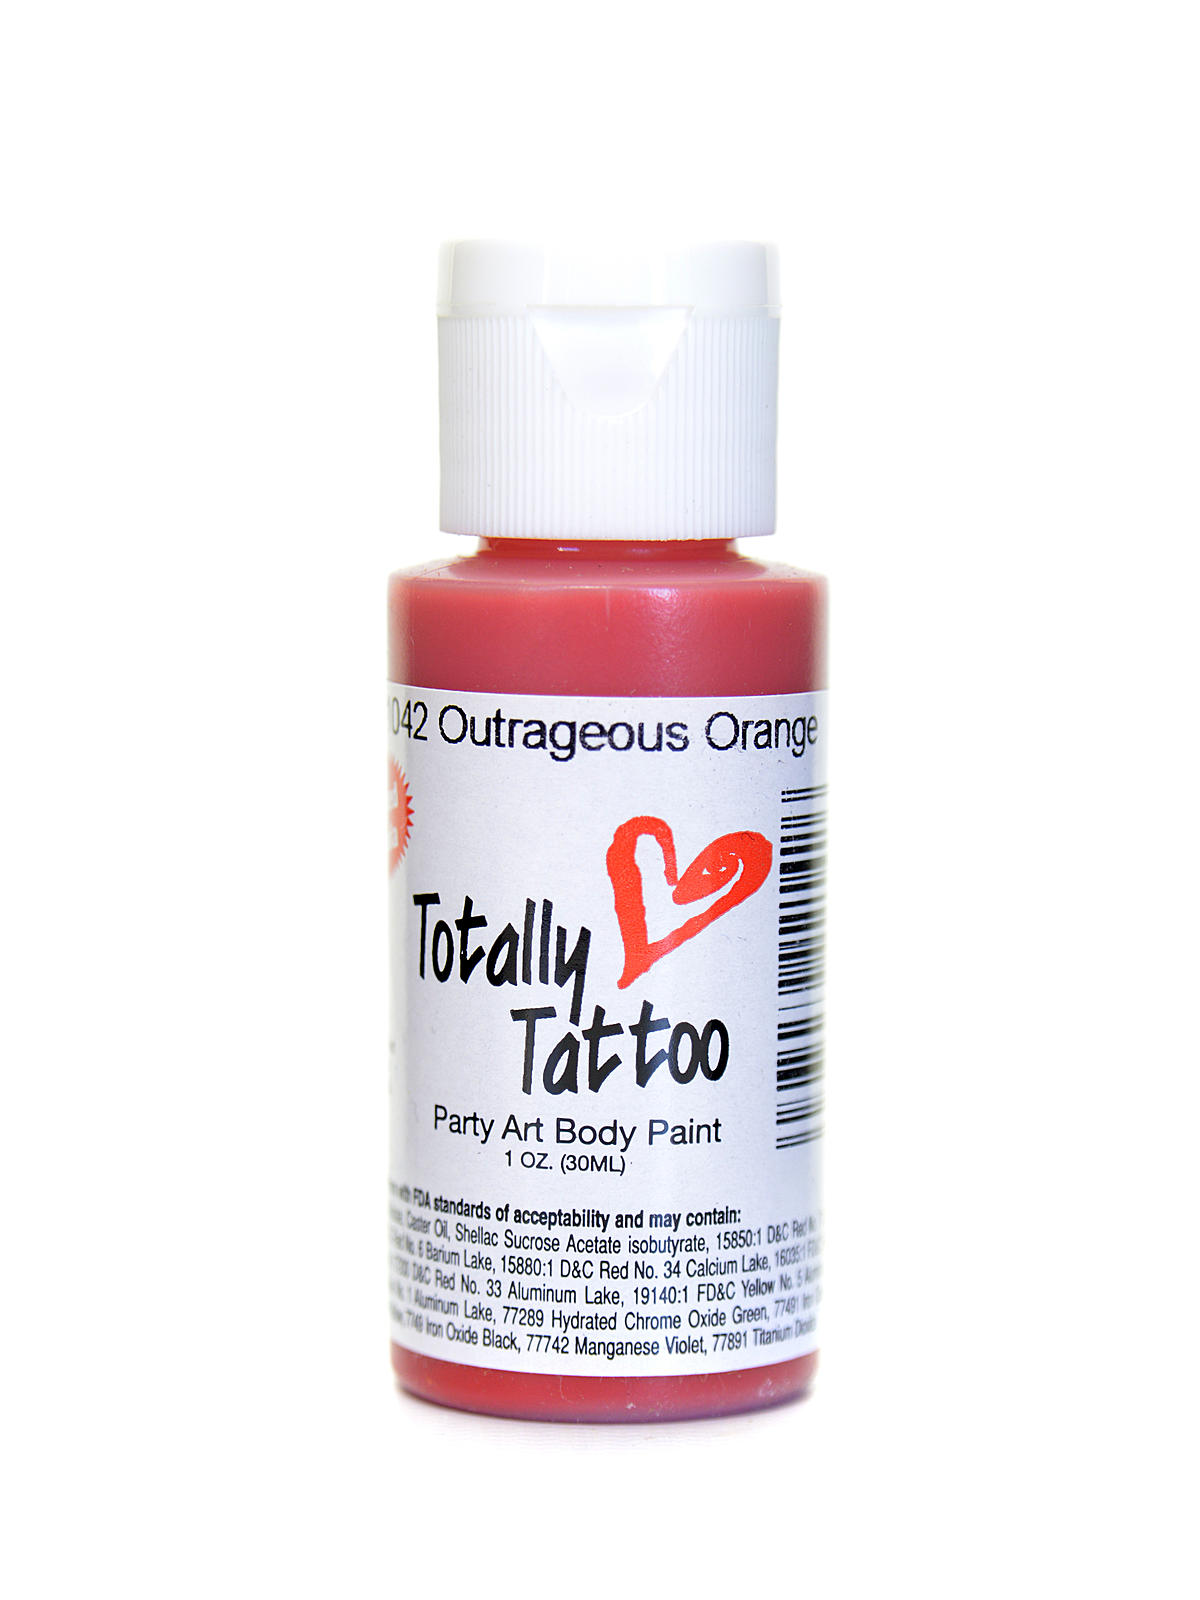 Totally Tattoo System Body Paint Outrageous Orange 1 Oz.